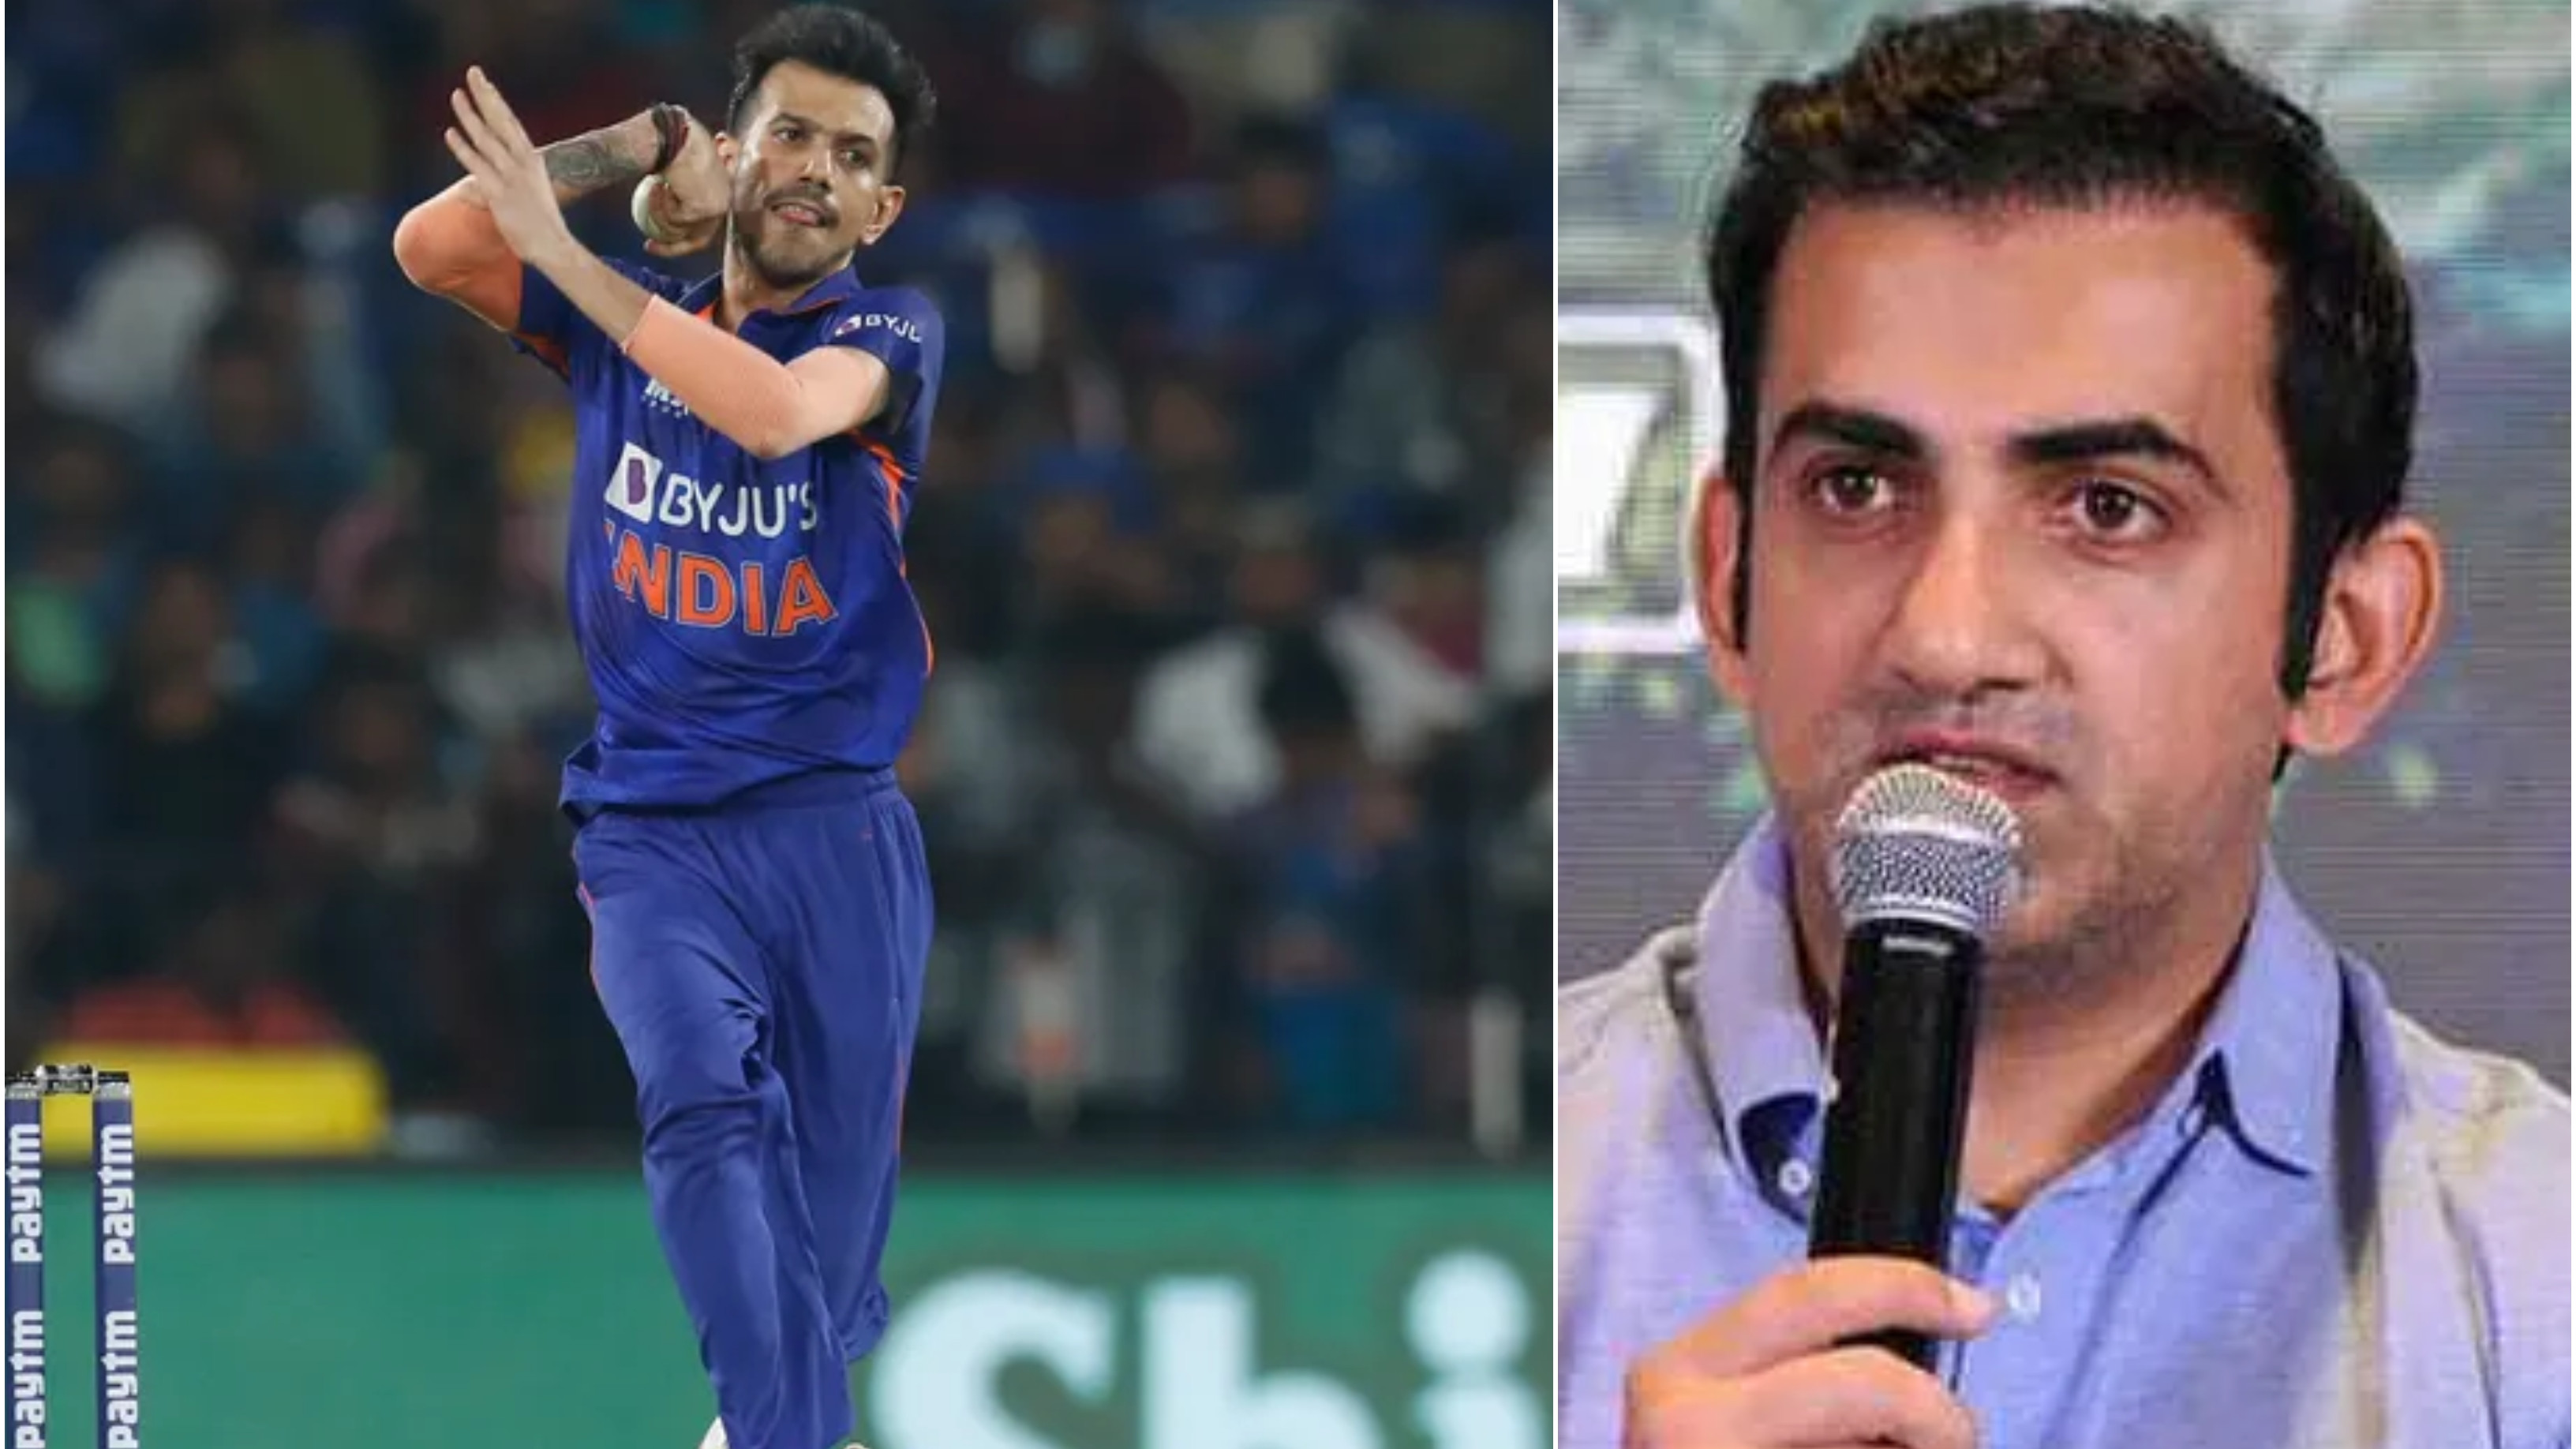 IND v SA 2022: “He needs to have an attacking mindset”, Gambhir slams Chahal’s approach in second T20I